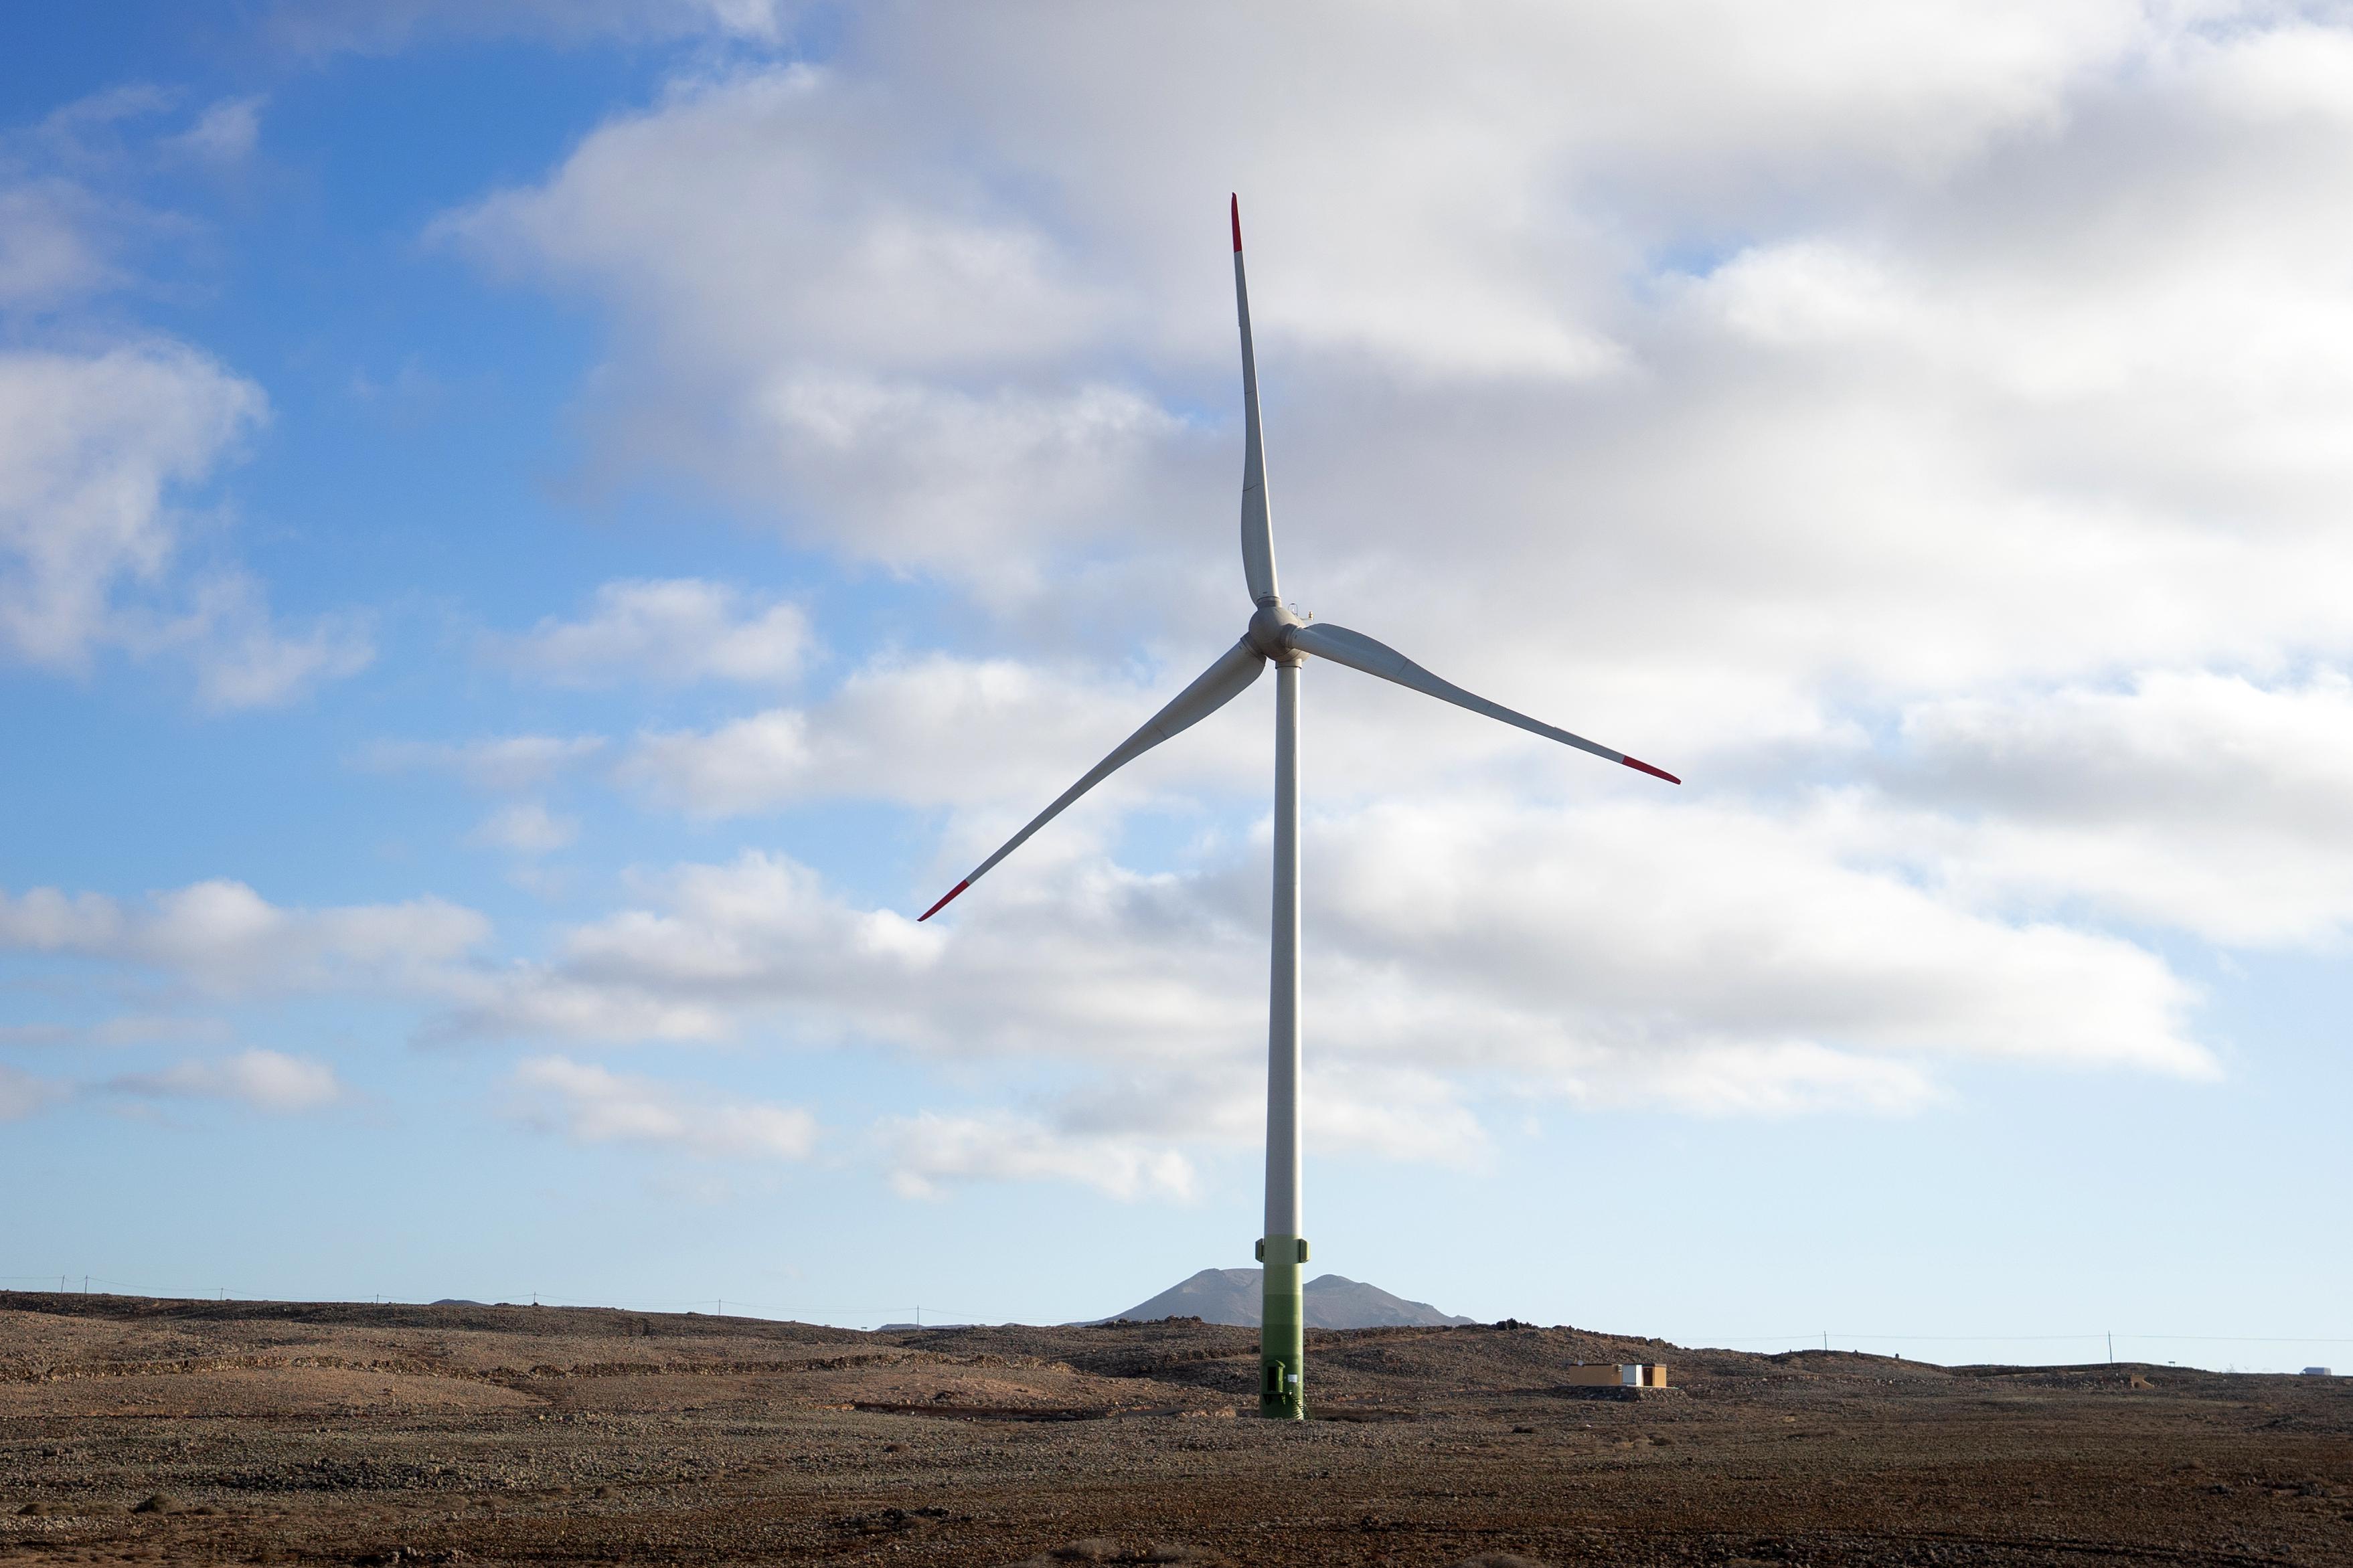 FUERTEVENTURA, SPAIN - MAY 08: A wind turbine operates in Corralejo on May 08, 2019 in Fuerteventura, Spain. Fuerteventura became known as the granary of the Canary islands but frequent droughts during the 18th and 19th centuries caused the collapse of the agriculture of the island. (Photo by Vittorio Zunino Celotto/Getty Images)